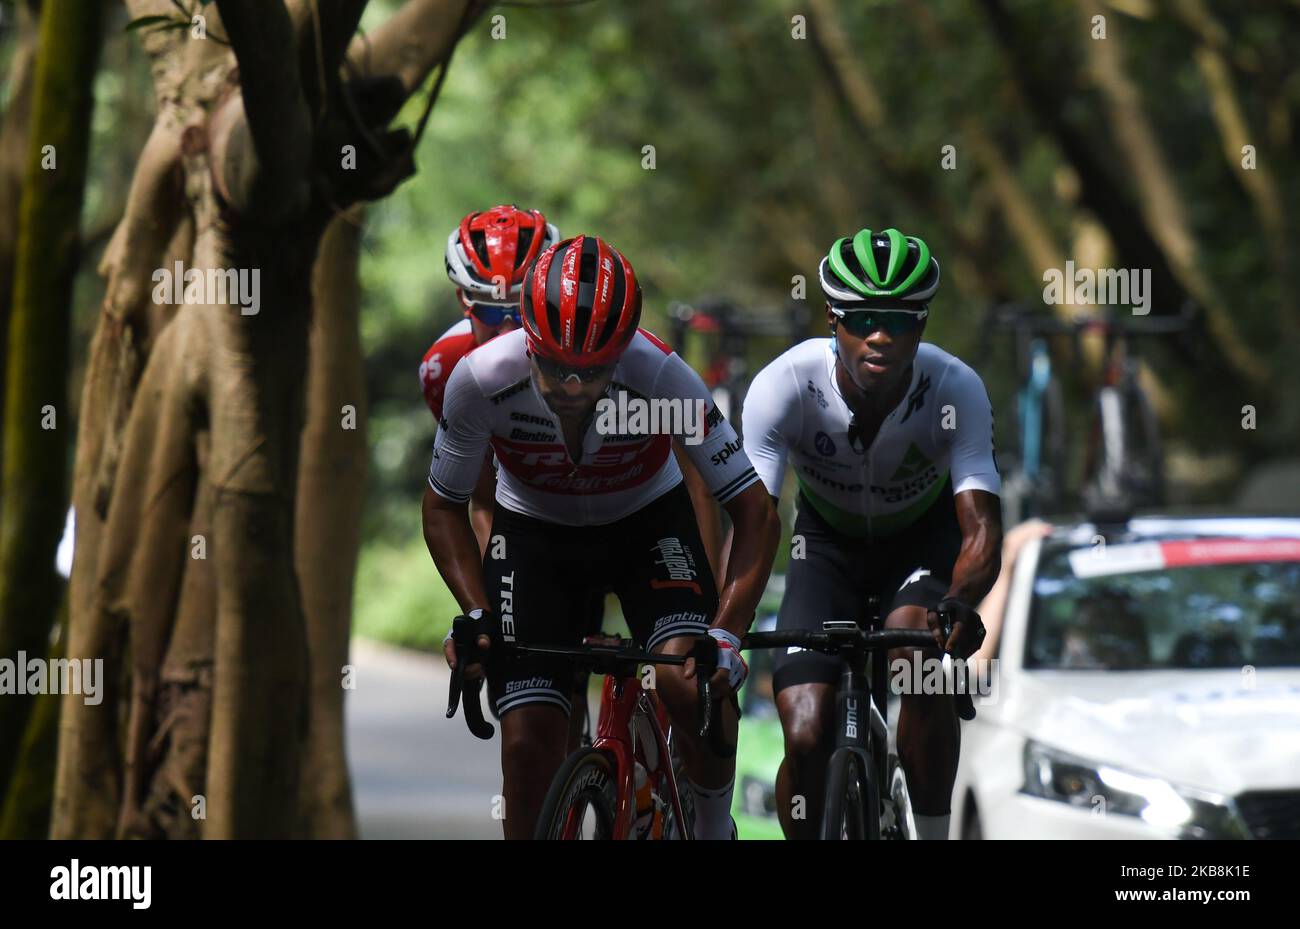 A breakaway of three riders (L-R) Brian van Goethem of Netherlands and Lotto Soudal, Jacopo Mosca of Italy and Trek - Segafredo, and Nic Dlamini of South Africa and Team Dimension Data, during the third stage, 143km Nanning Circuit Race stage, of the 3rd edition of the Cycling Tour de Guangxi 2019, . On Saturday, October 19, 2019, in Nanning, Guangxi Region, China. (Photo by Artur Widak/NurPhoto) Stock Photo